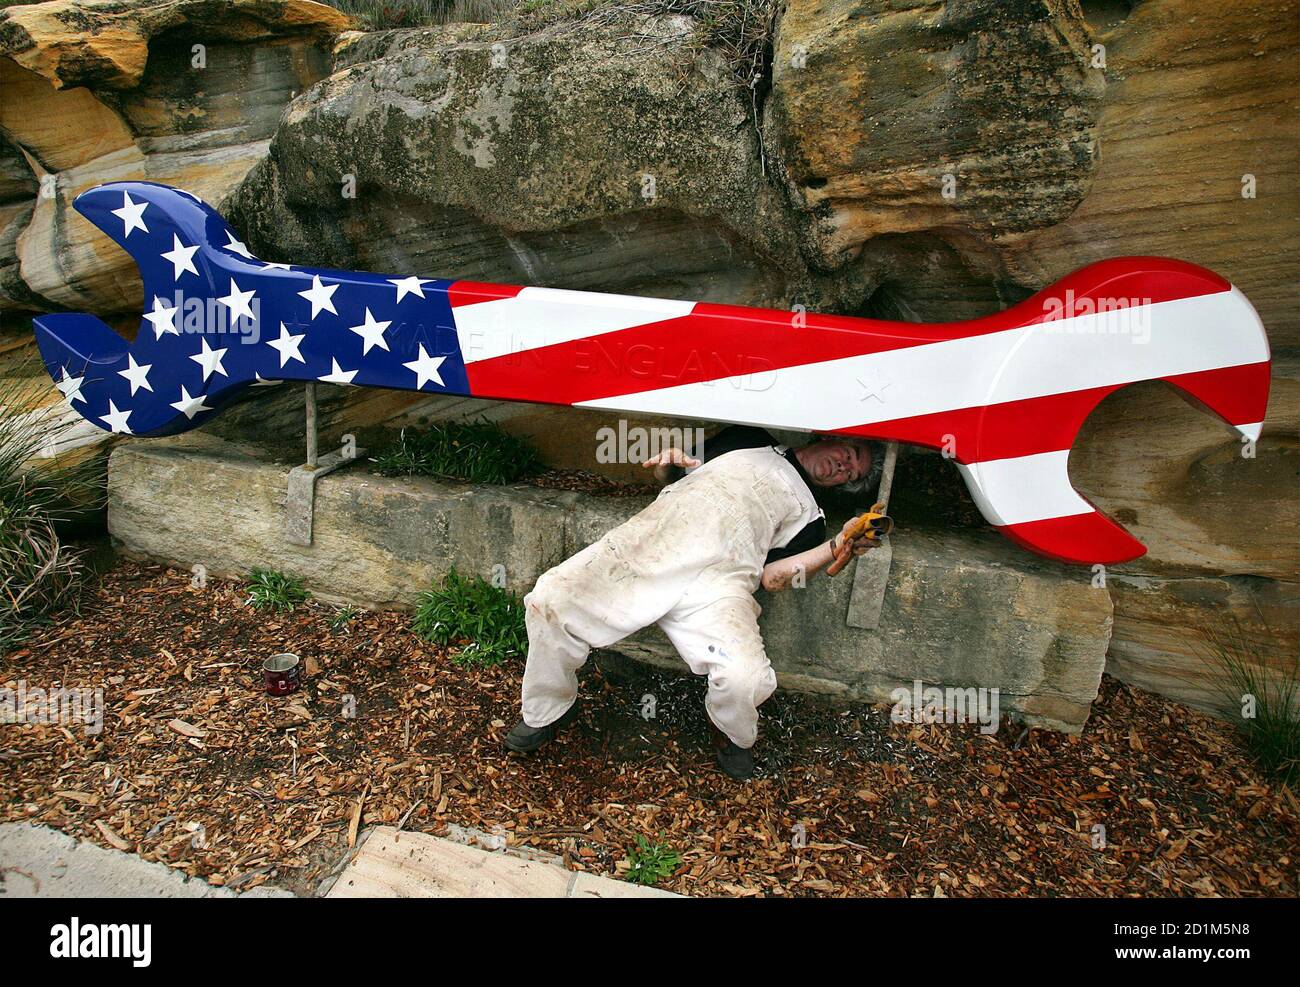 Artist Peter Adams eases out from underneath his artwork called 'A Star Bangled Spanner" after installing it on a cliff near Bondi Beach in Sydney Novembr 1, 2005. Adams says his artwork, made of timber, fibreglass, resin, steel and wood, represents the United States' meddling in world affairs, causing unrest to continue, like a "spanner in the works". The work is one of over over 100 exhibits from Australian and international artists participating in the annual 'Sculpture by the Sea' event which is in its ninth year. Banque D'Images